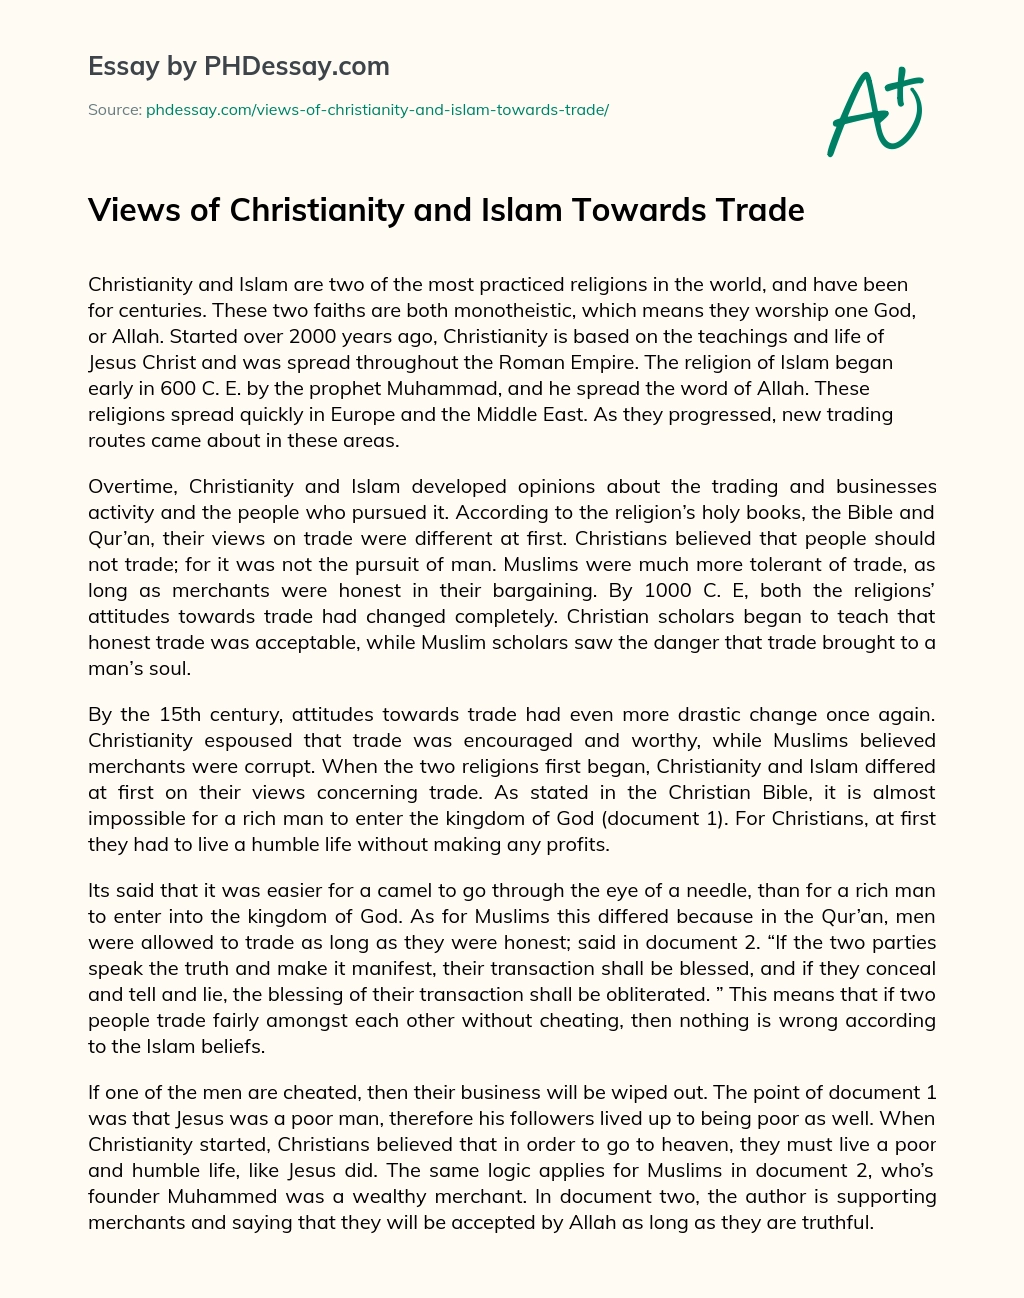 Views of Christianity and Islam Towards Trade essay